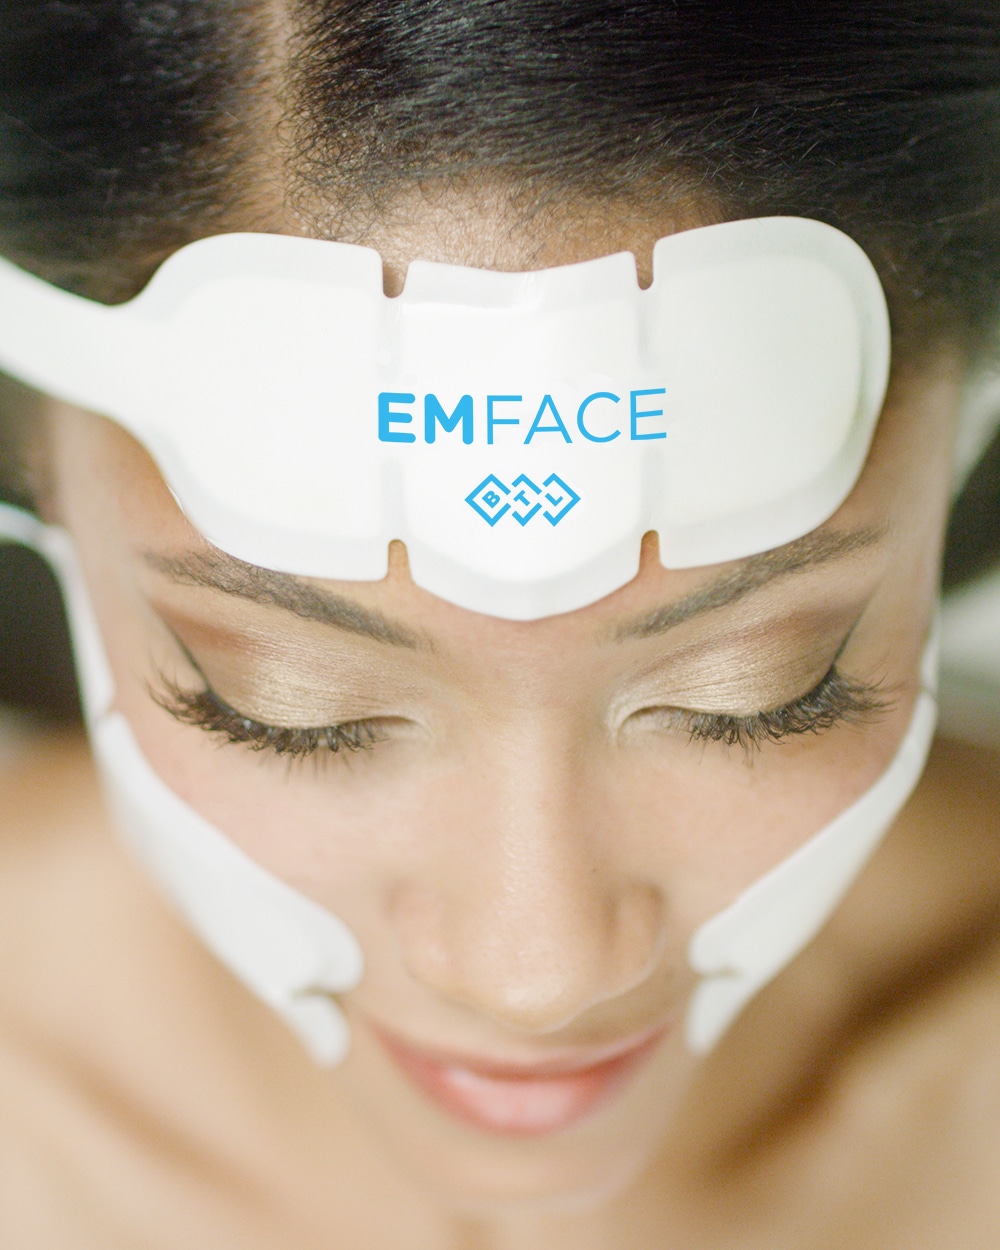 Woman wears the EMface applicators to firm and tighten skin.